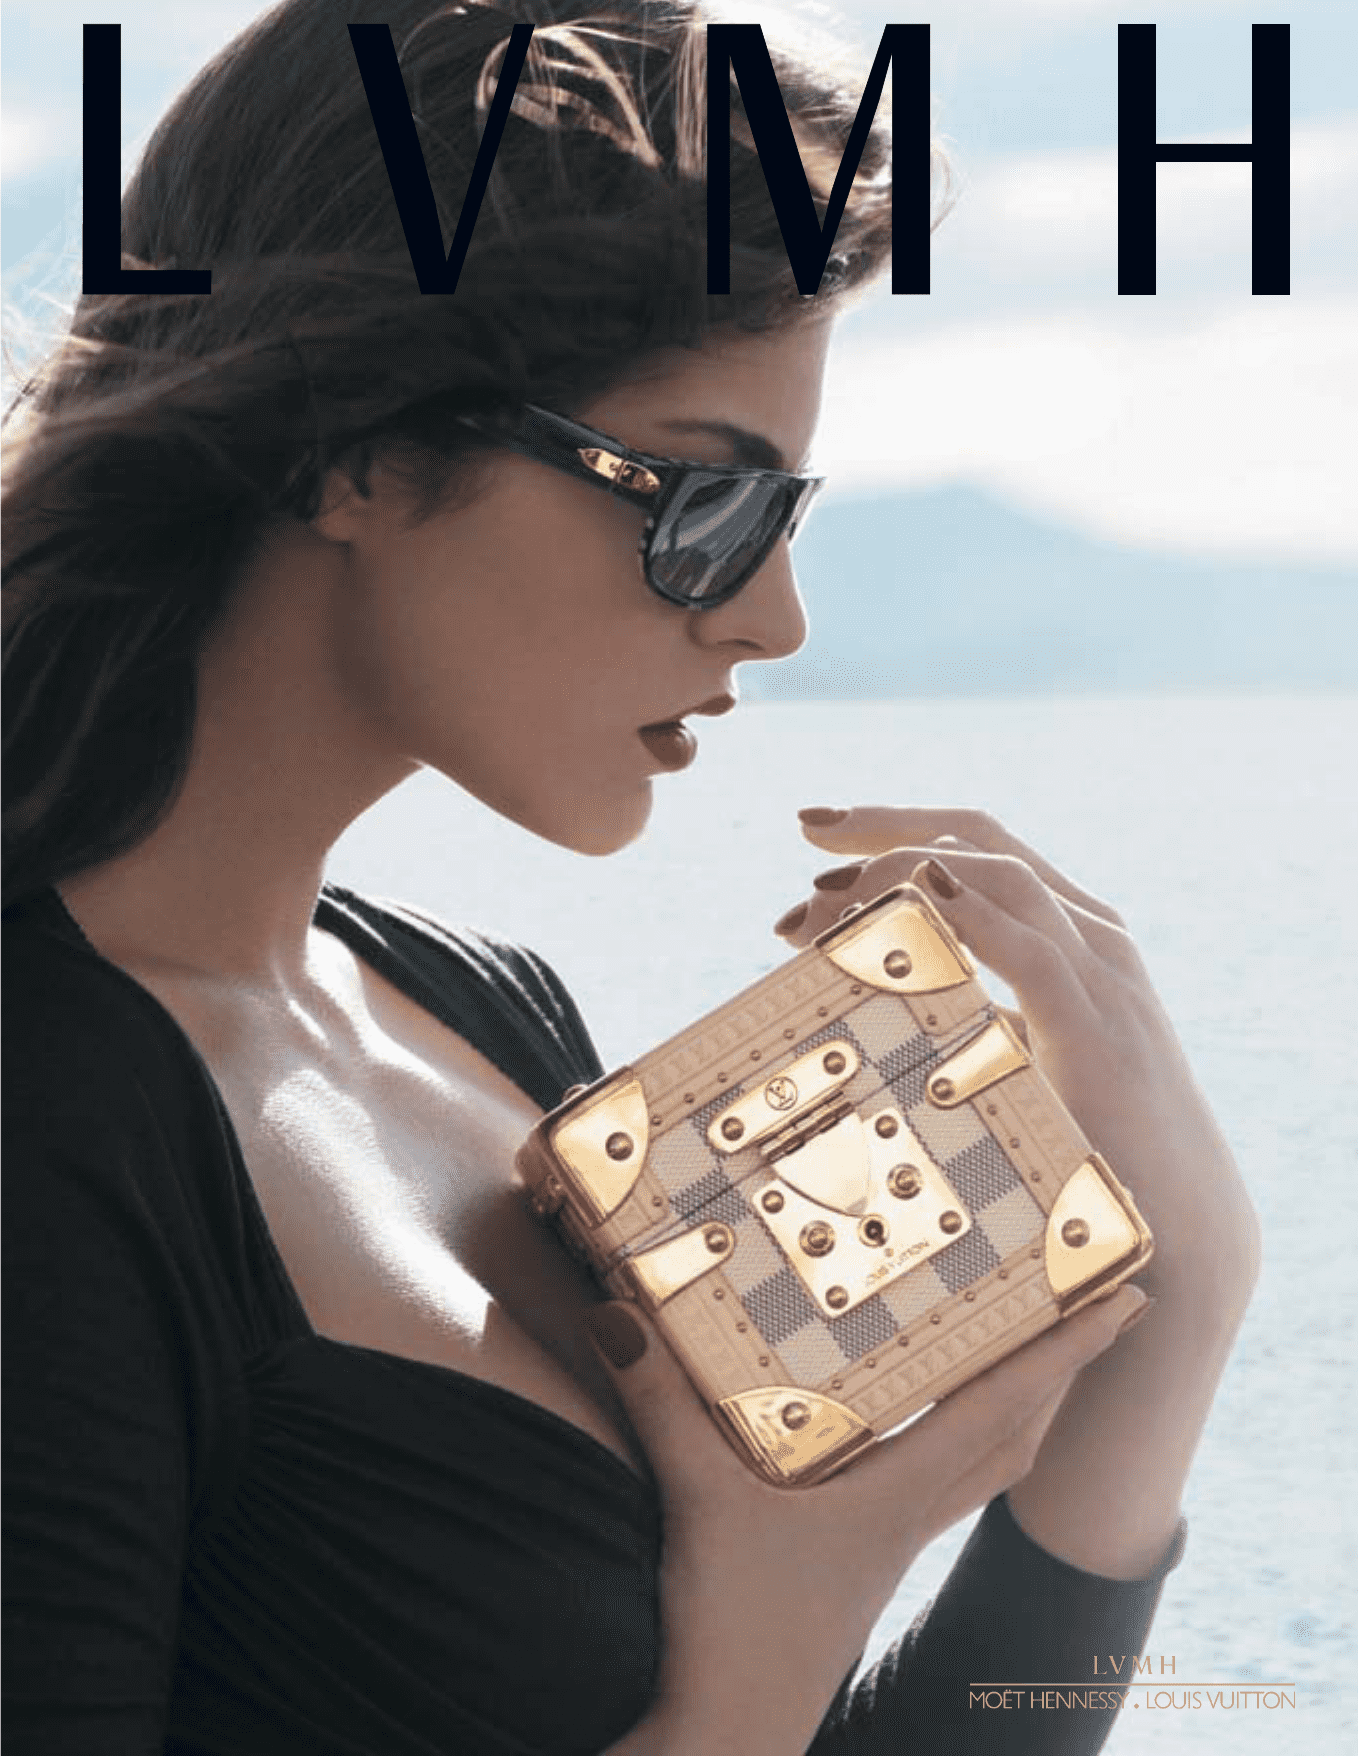 Lvmh Moet Hennessy Louis Vuitton Annual Report